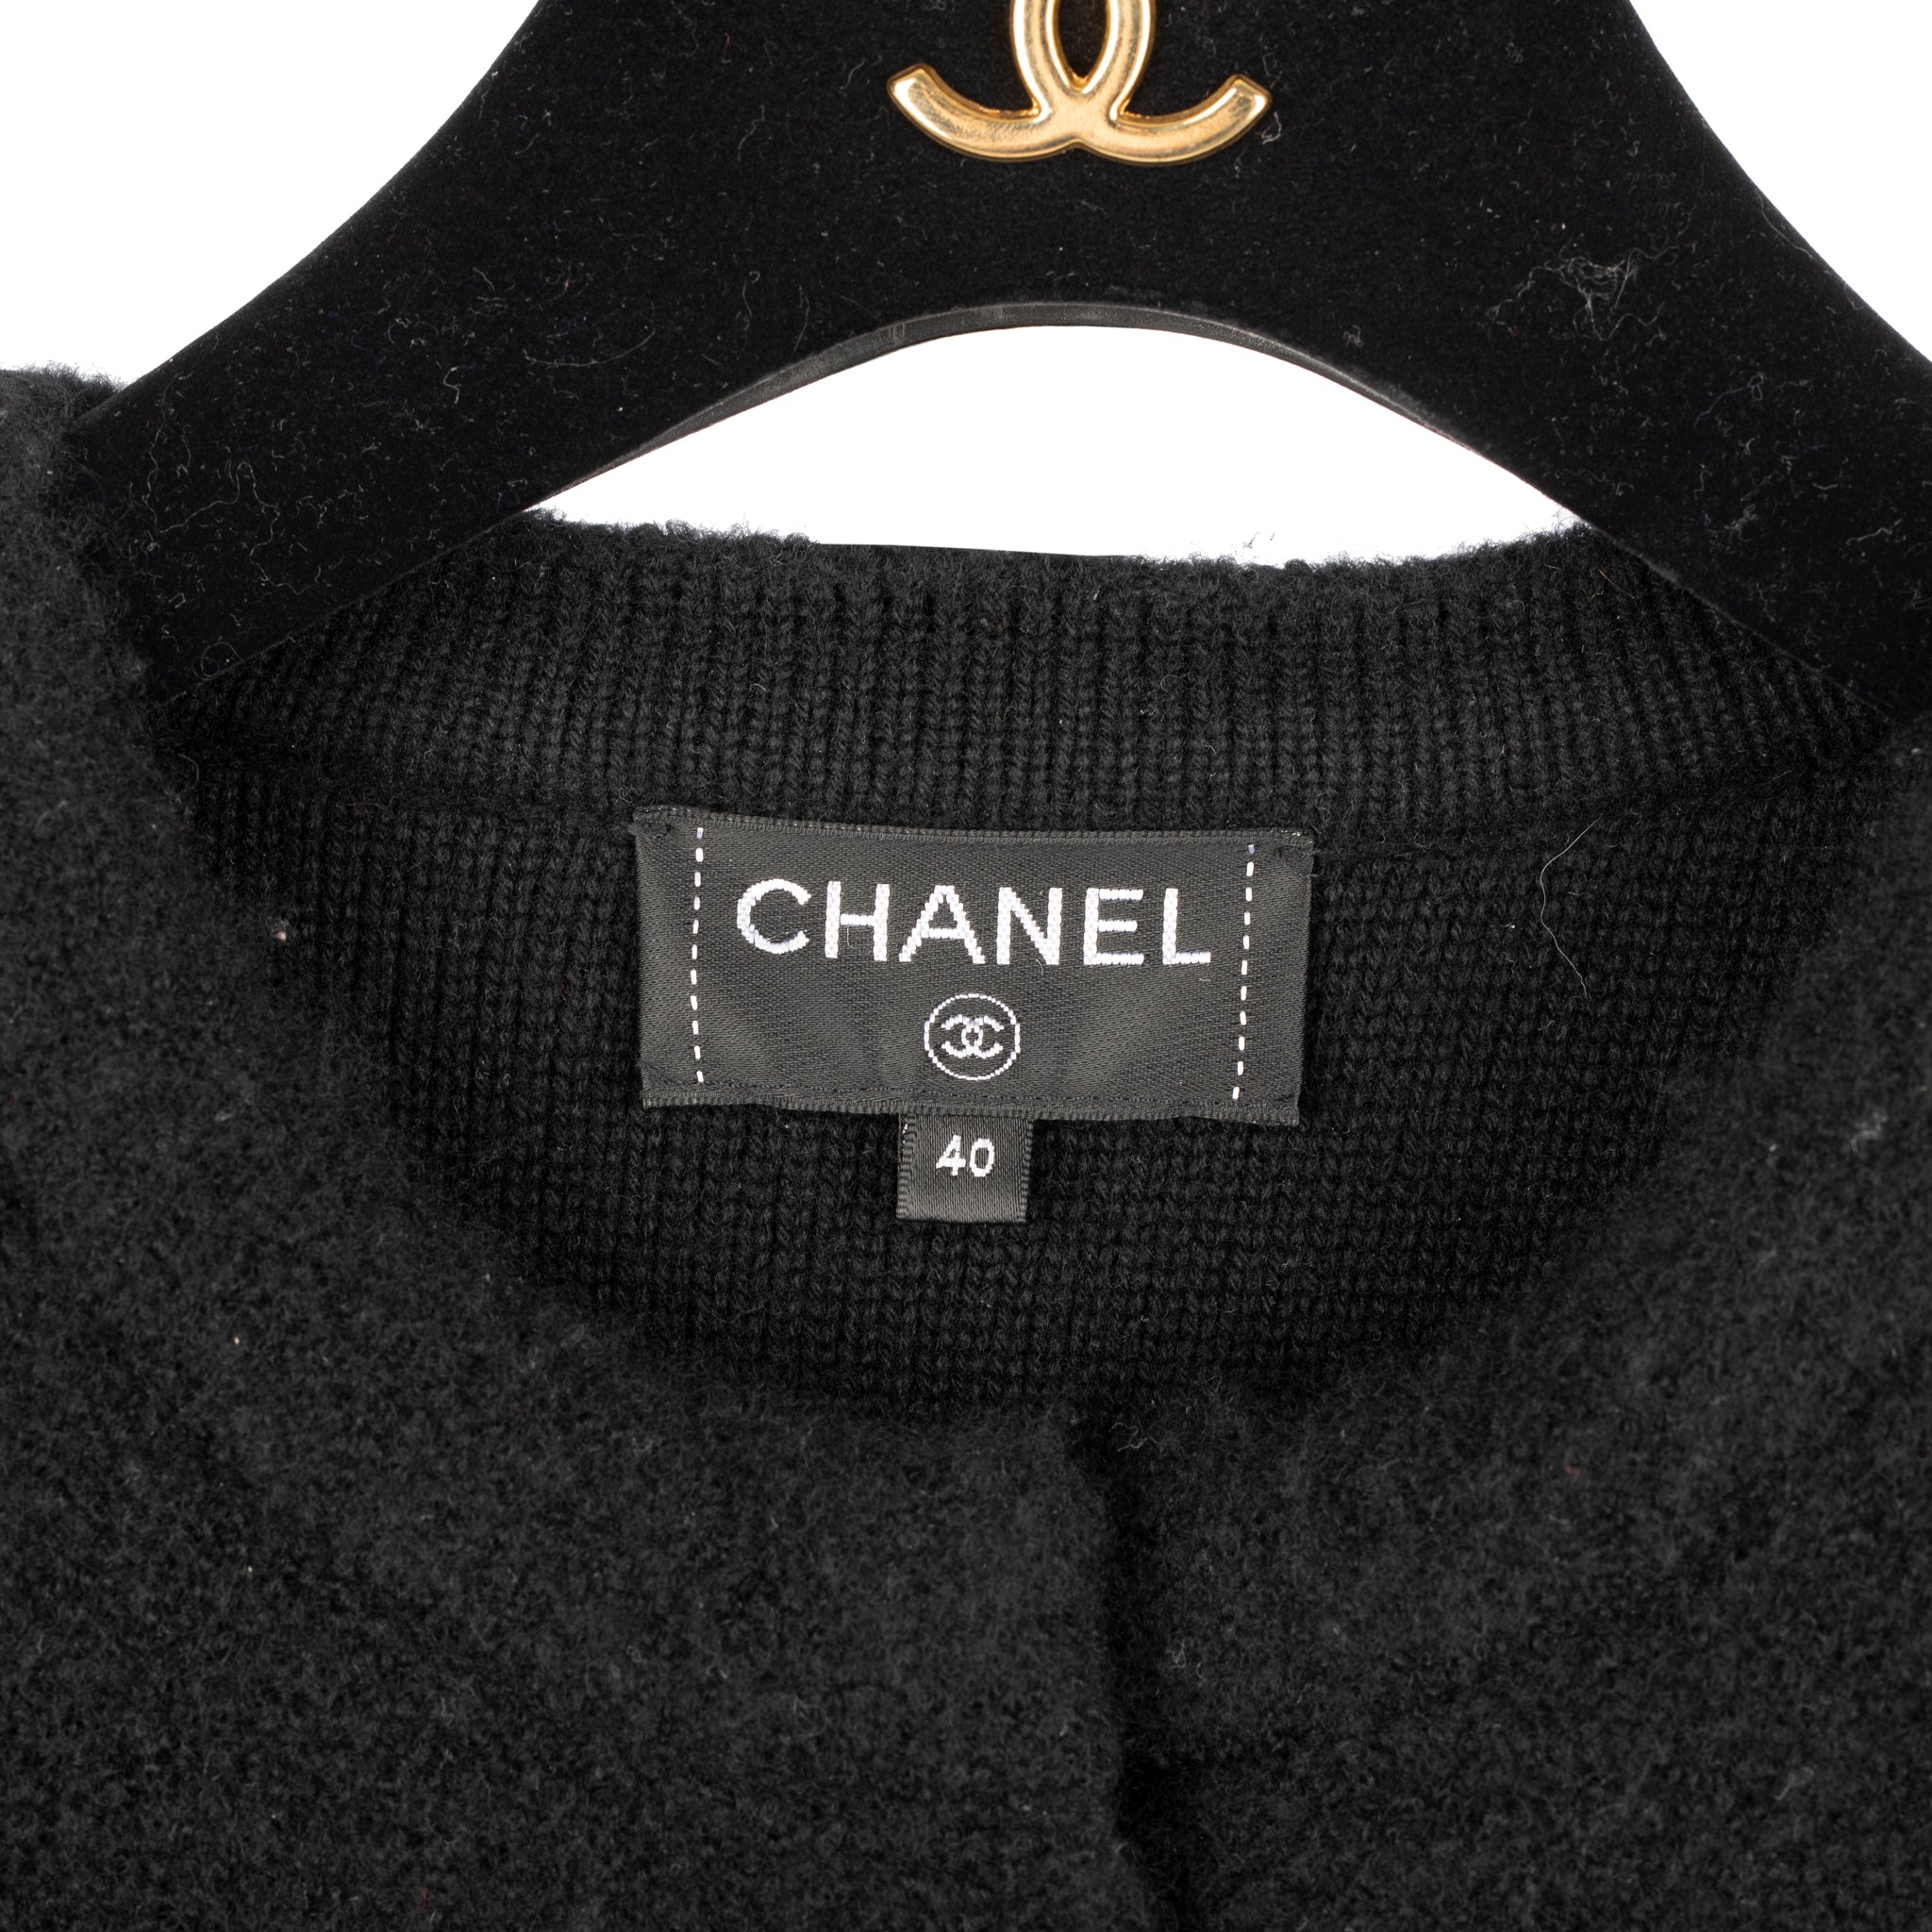 Chanel Black Cashmere Cardigan 40 Fr - On Repeat